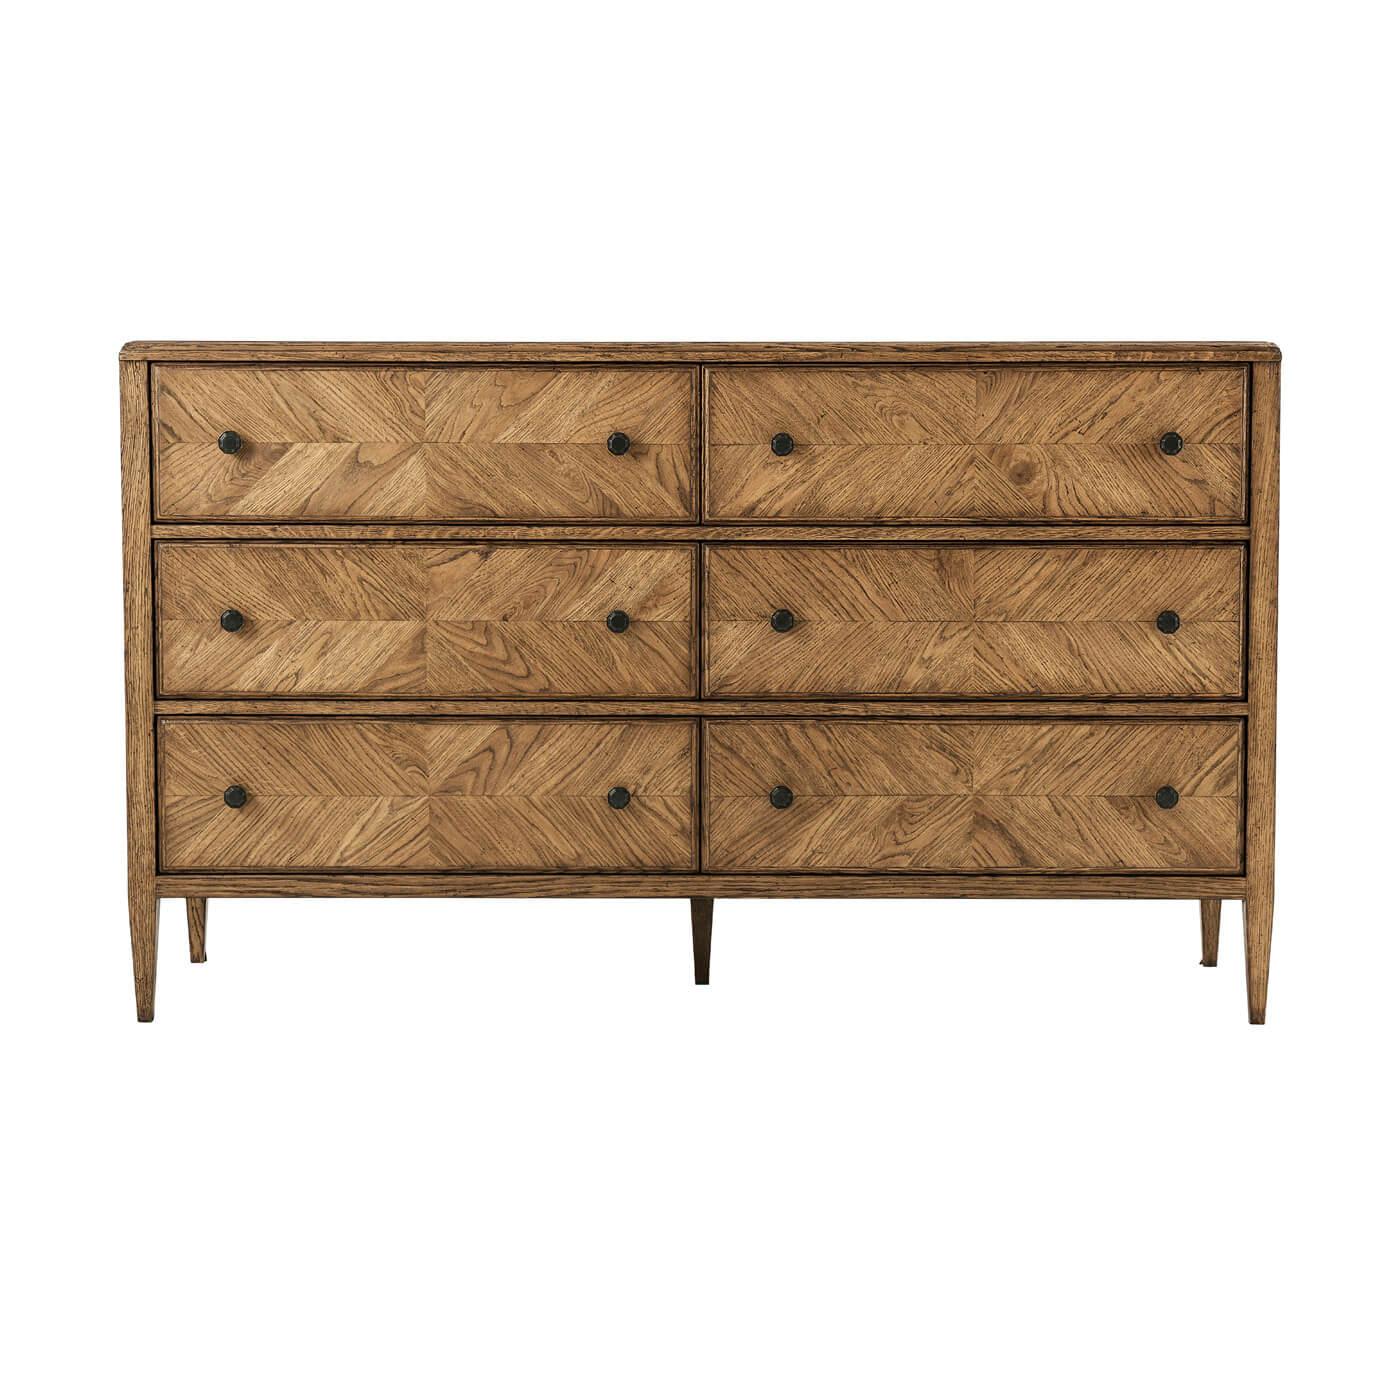 A rustic-style oak parquetry dresser with six hand-veneered drawers accented with Verde Bronze finish handles and tapered oak legs. 

Shown in dawn finish
Dimensions
63.5